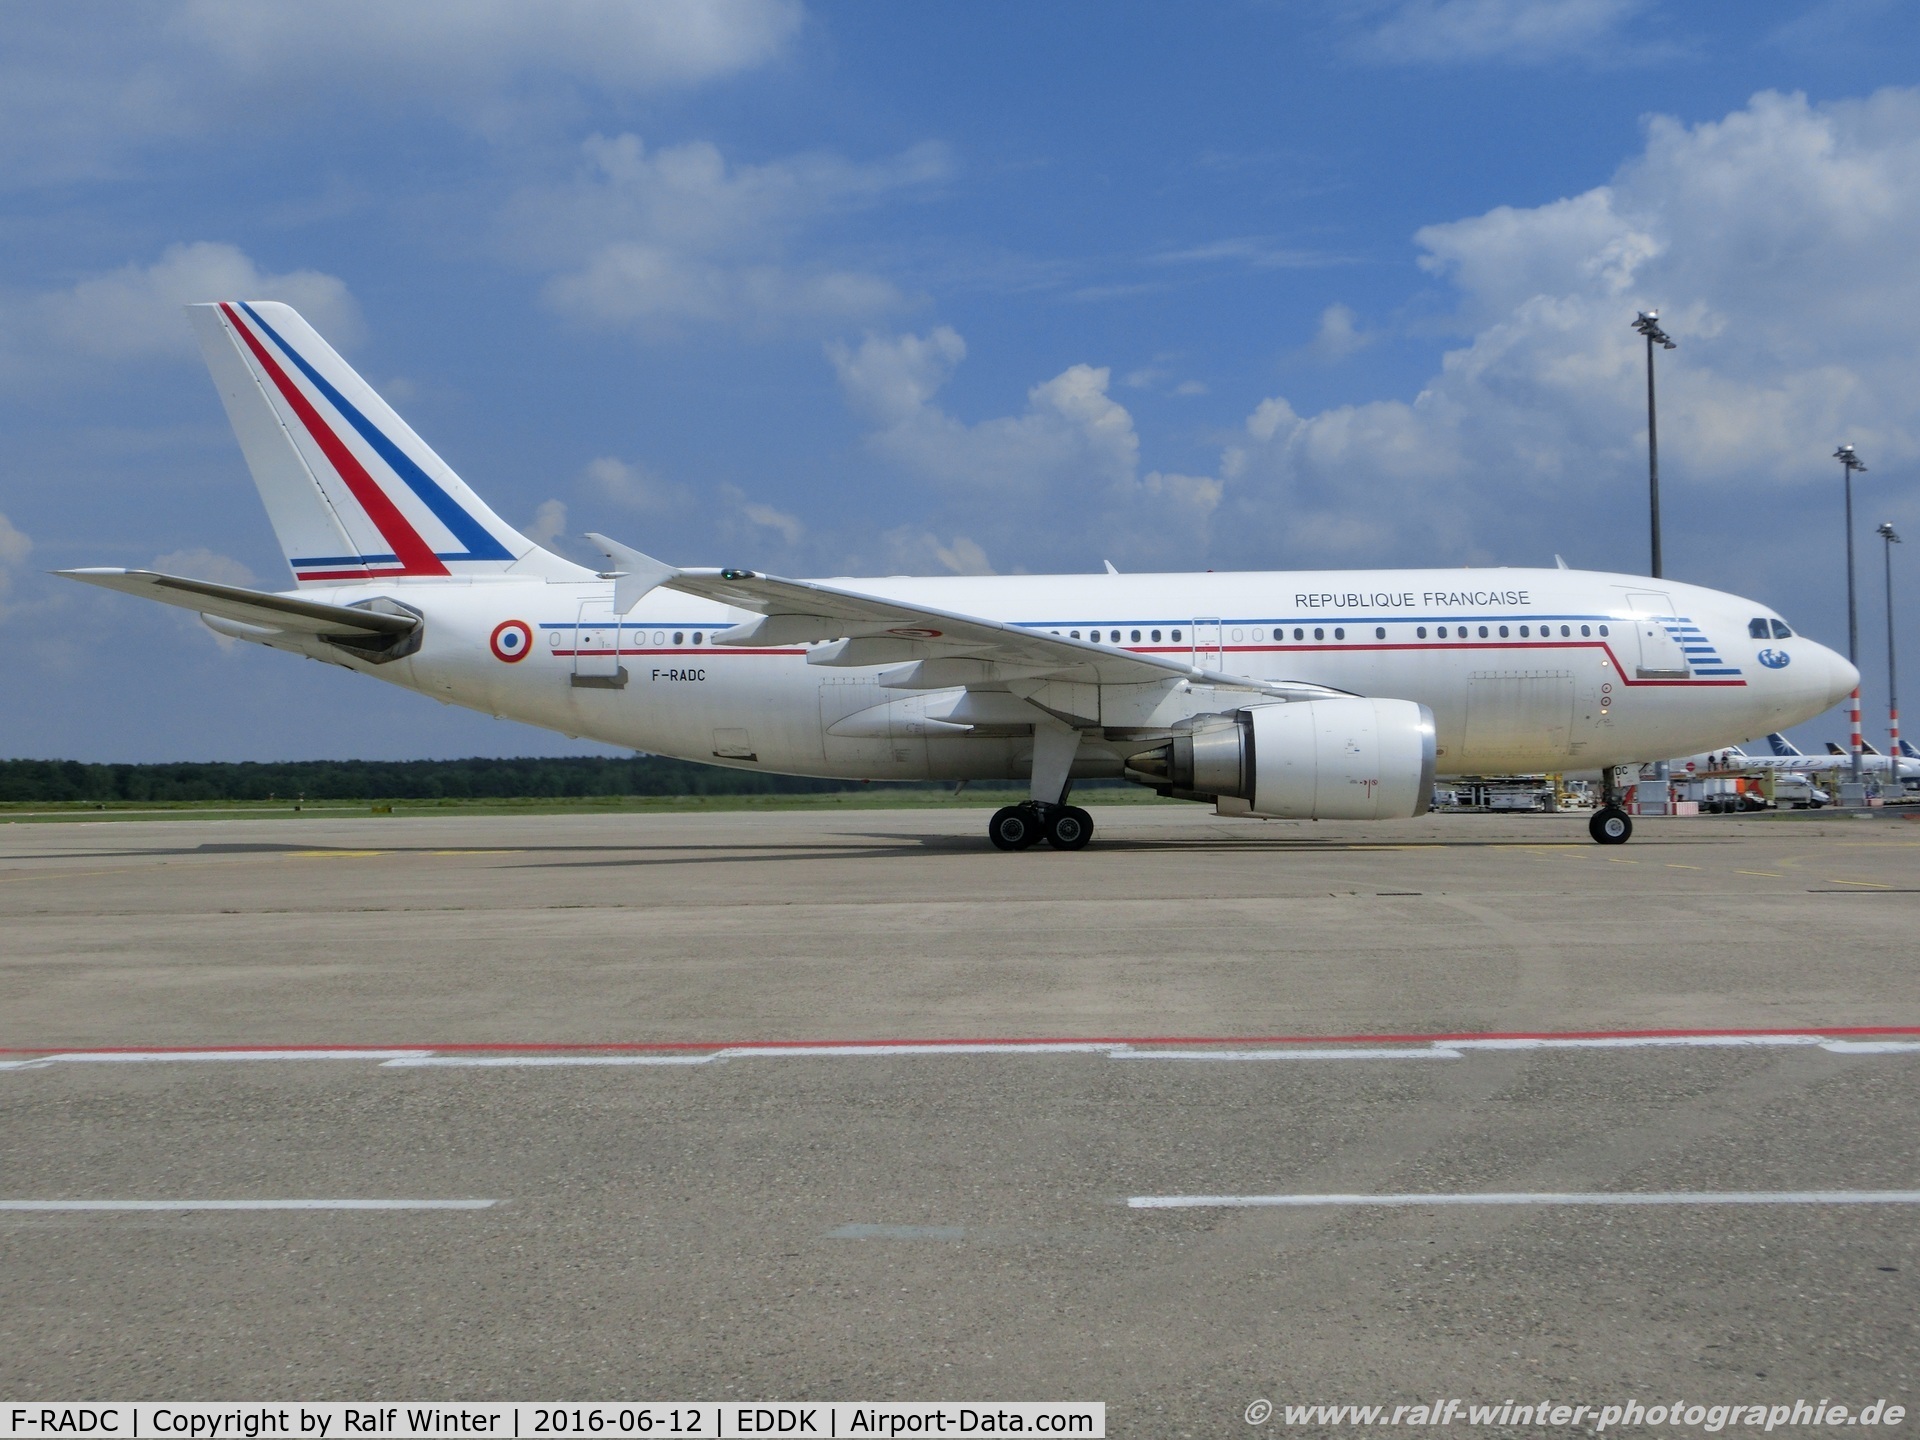 F-RADC, 1988 Airbus A310-304 C/N 418, Airbus A310-304 - CTM French Air Force - 418 - F-RADC - 12.06.2016 - CGN